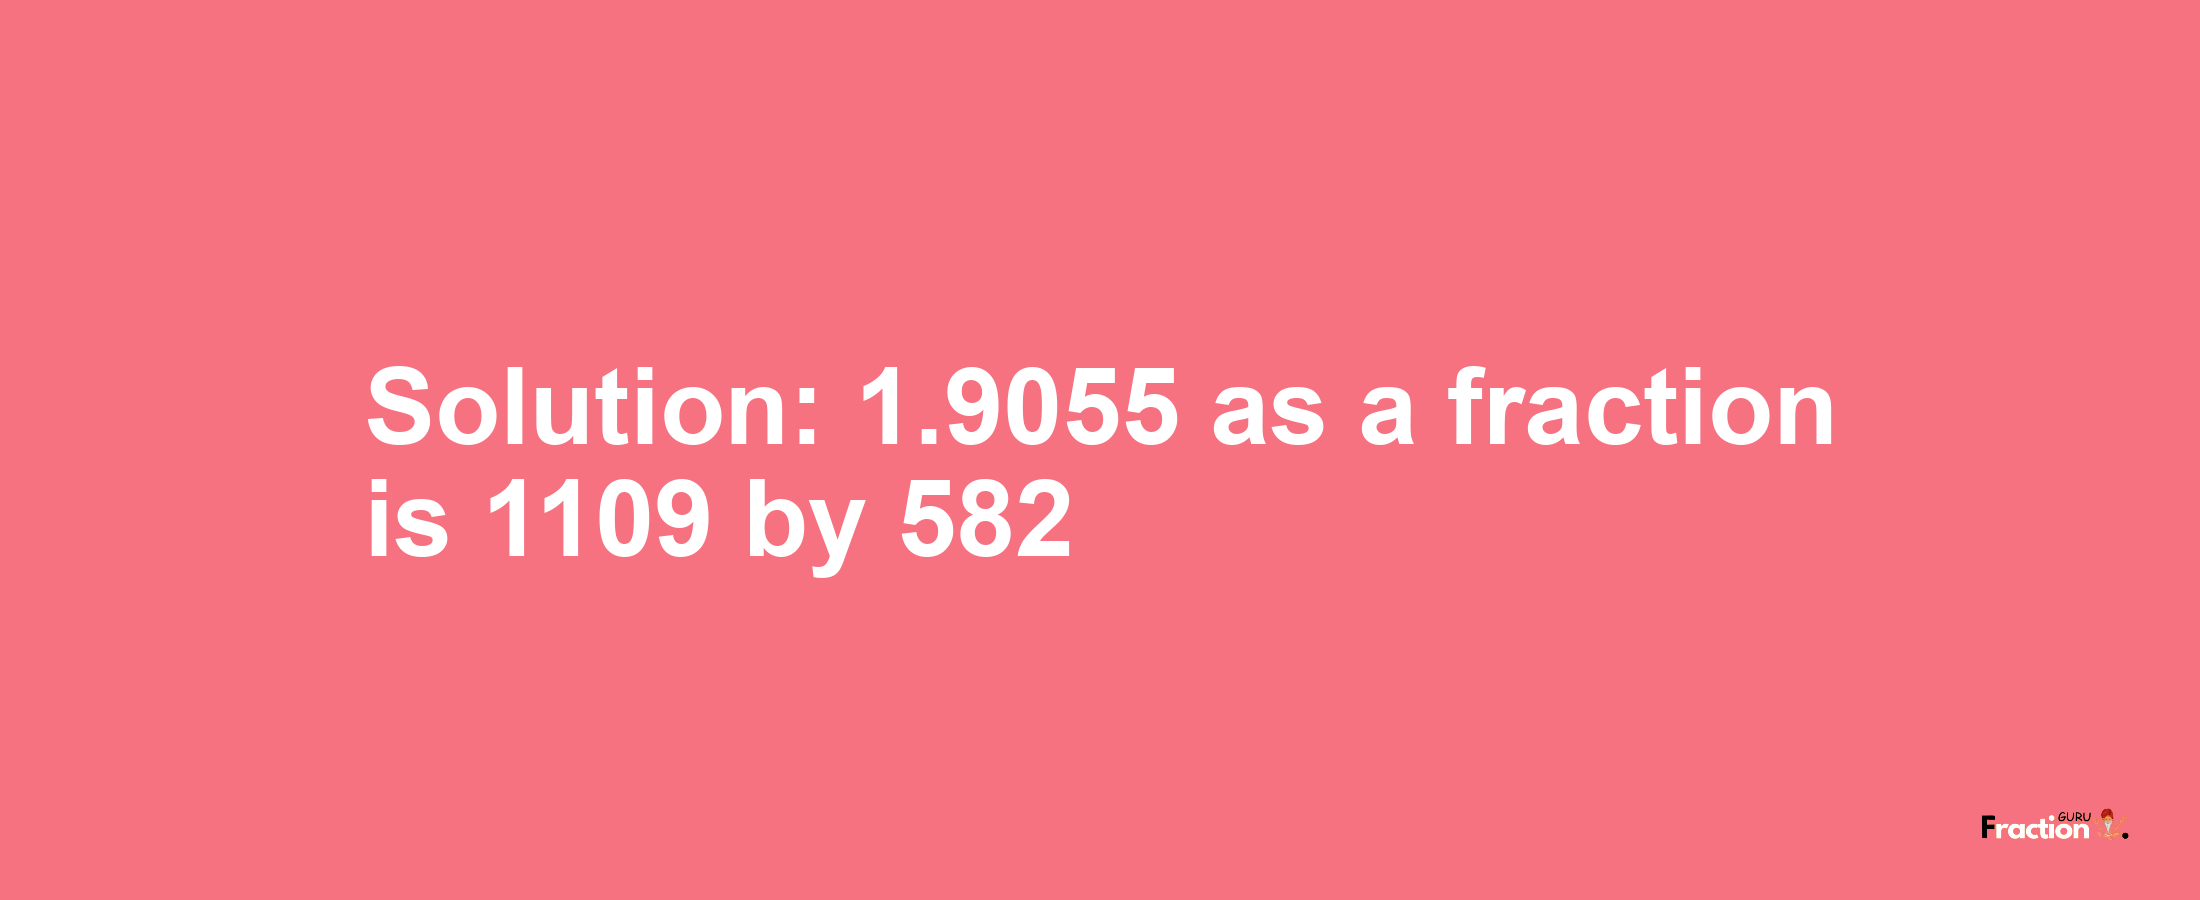 Solution:1.9055 as a fraction is 1109/582